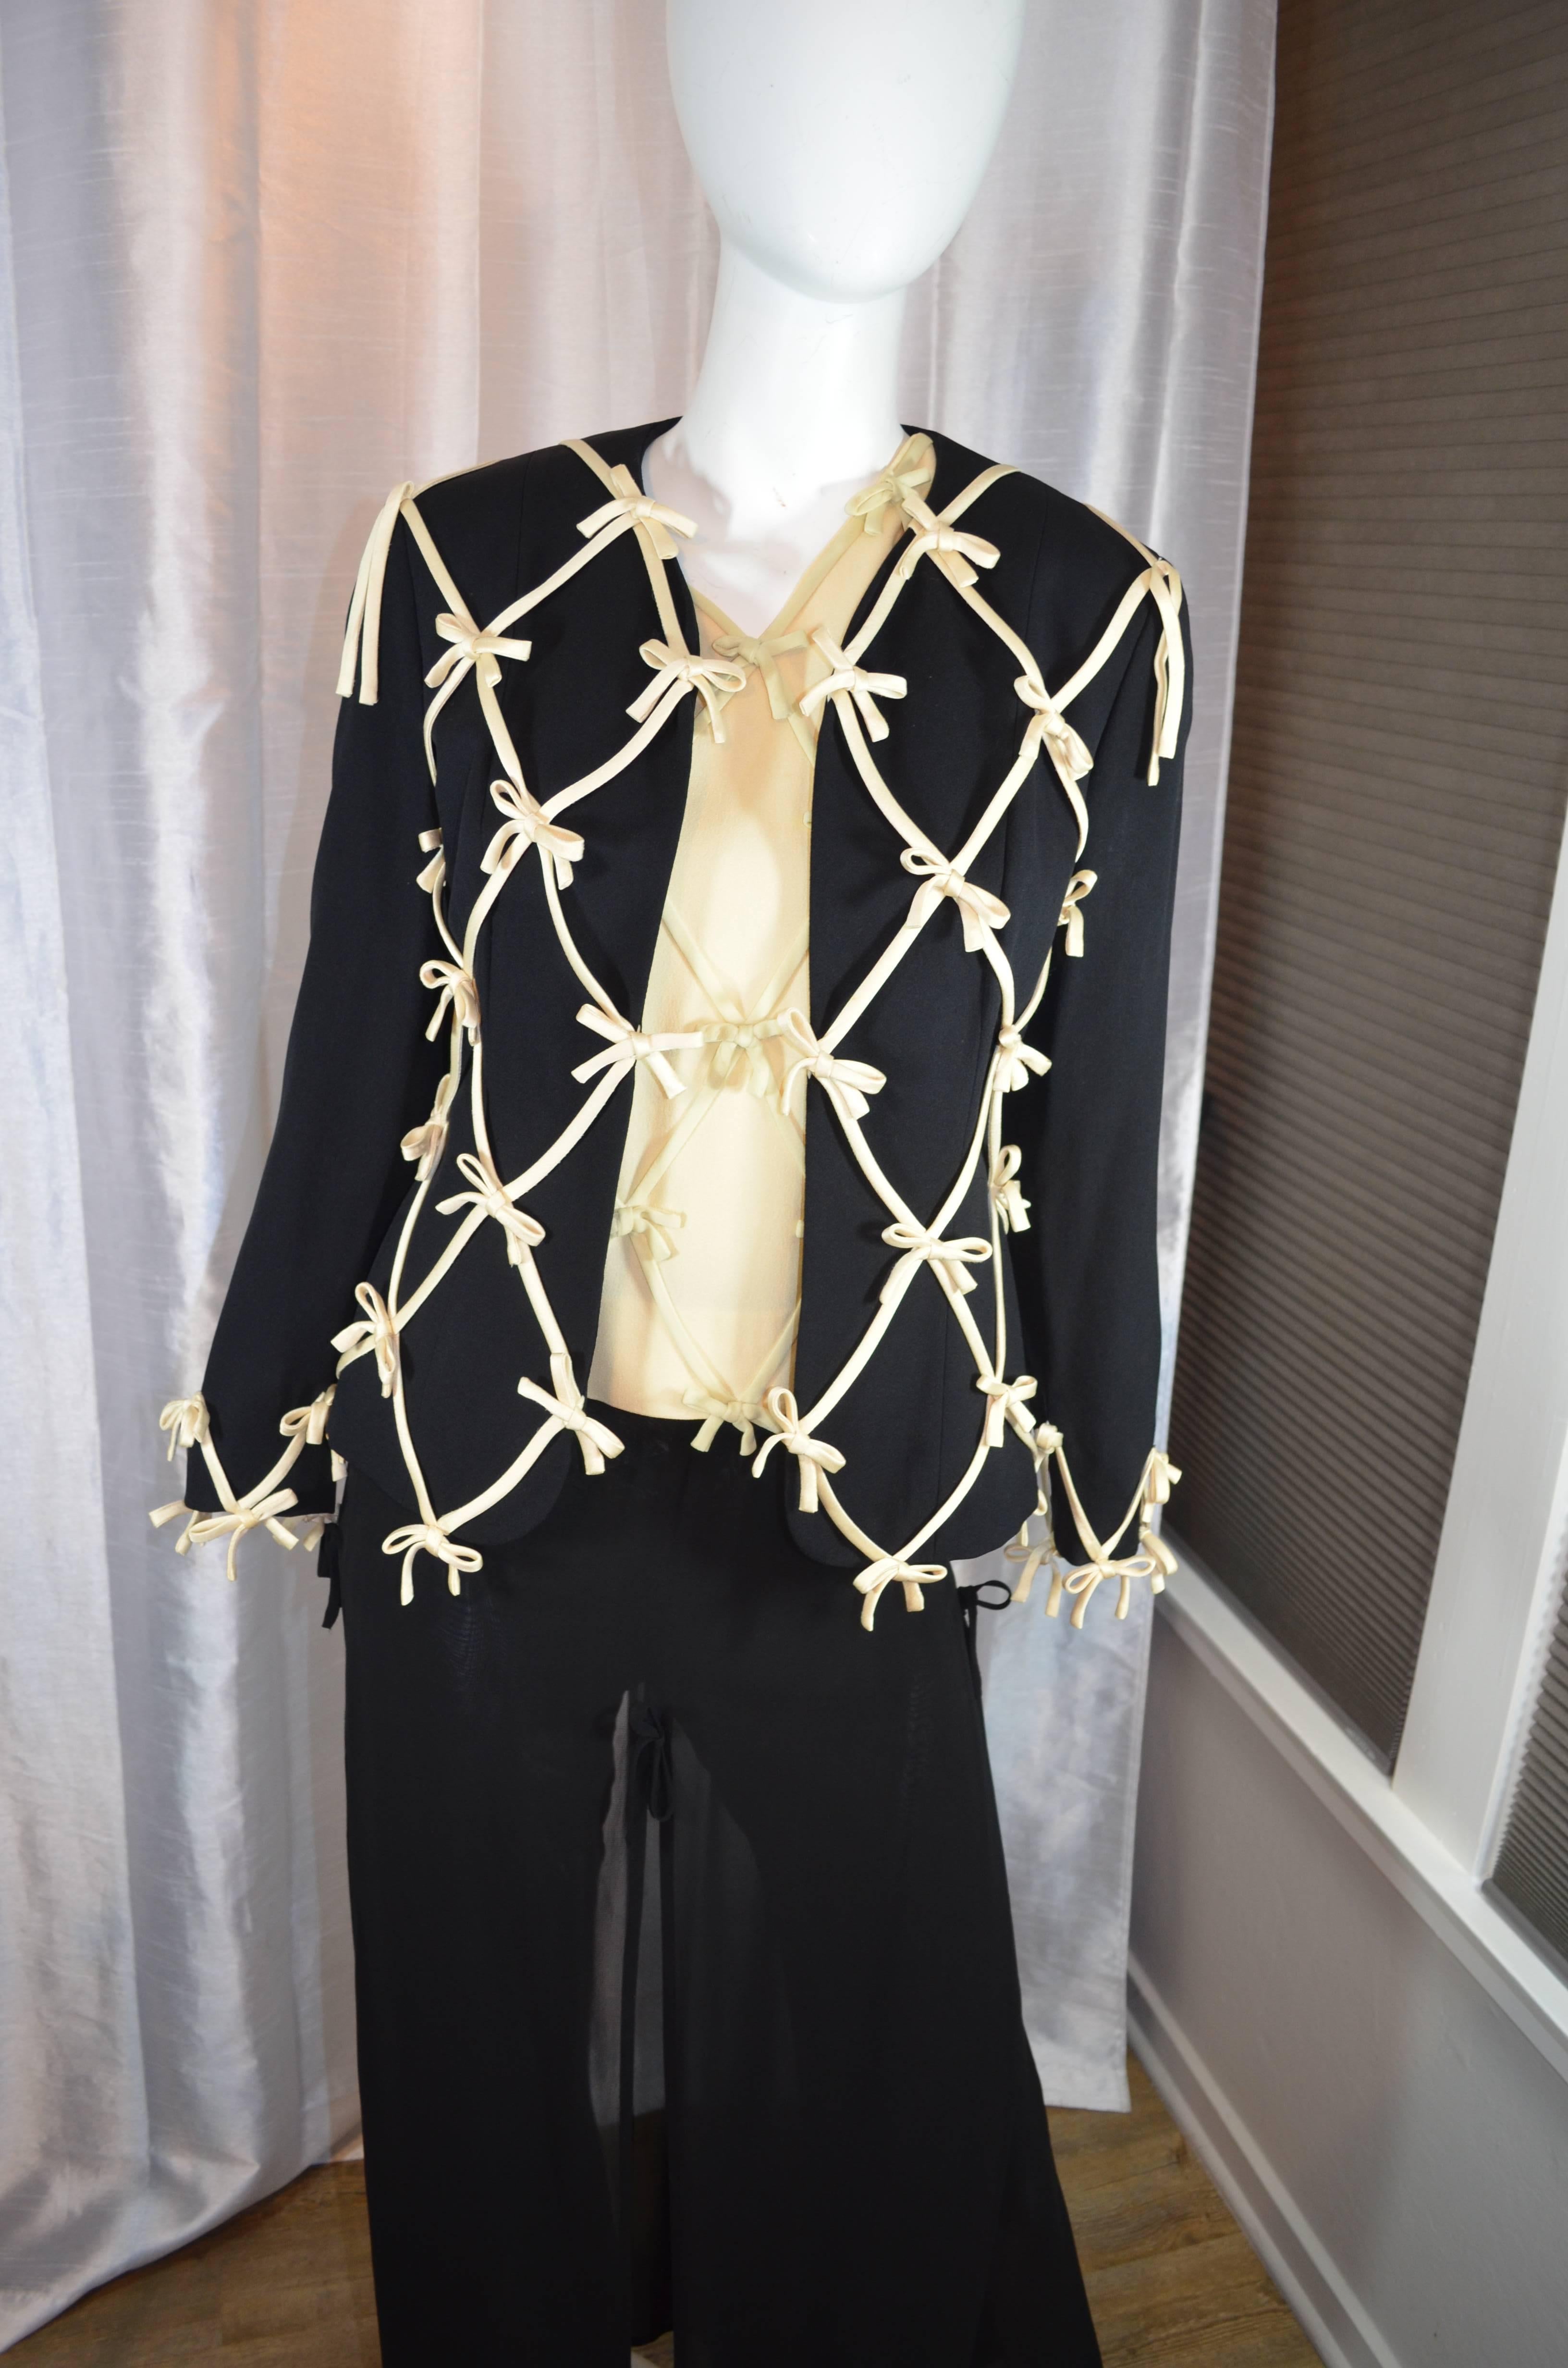 Moschino Cheap and Chic Bow Embellished Pants Suit In Excellent Condition In Carmel, CA